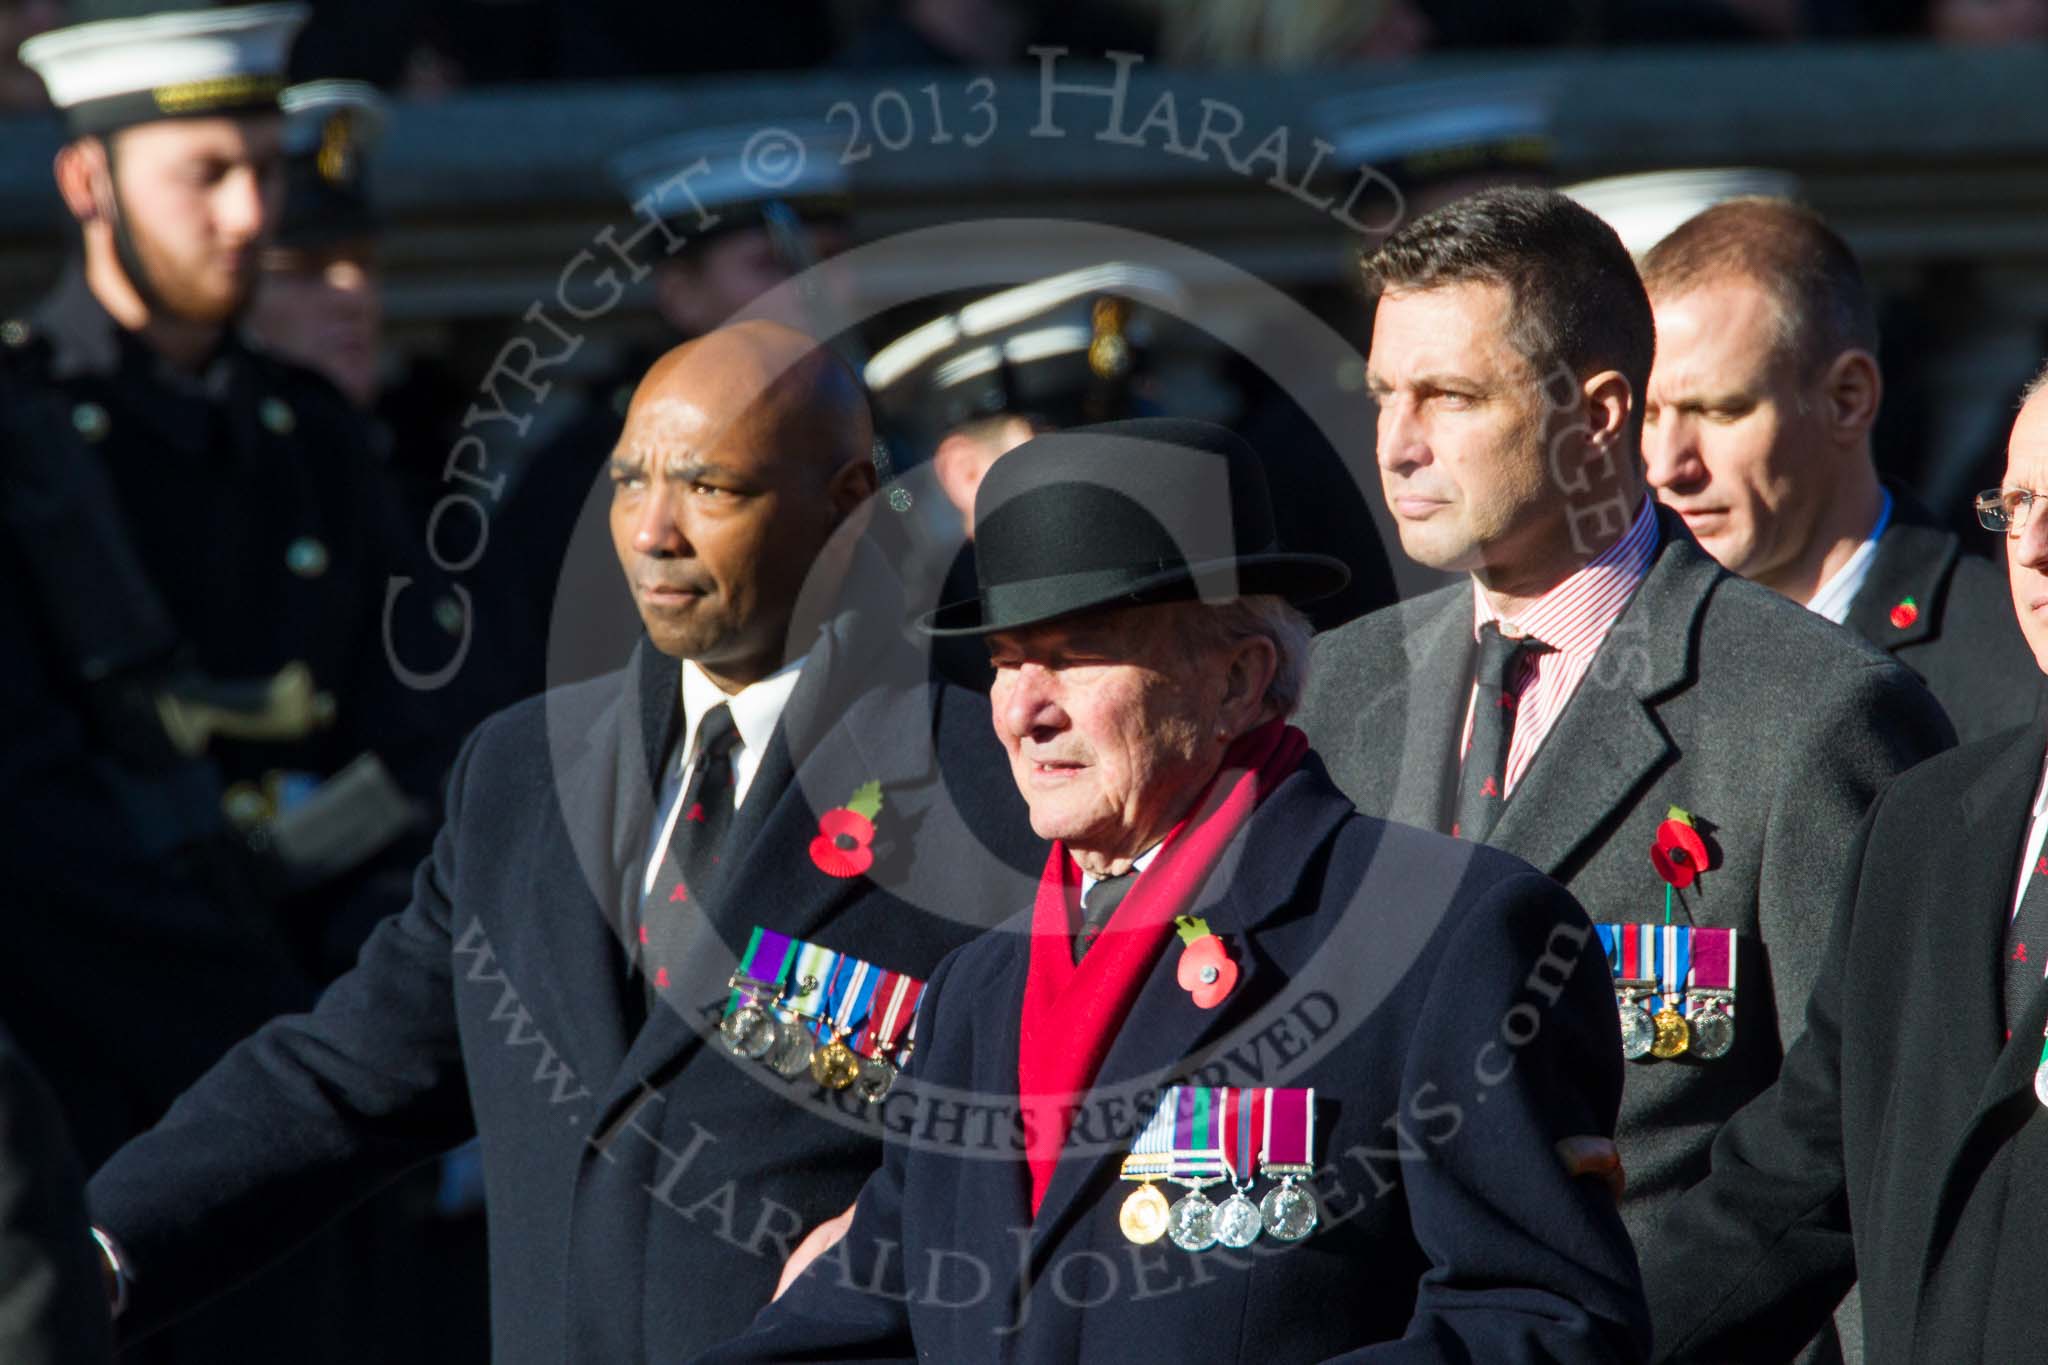 Remembrance Sunday at the Cenotaph in London 2014: Group B23 - Royal Army Veterinary Corps & Royal Army Dental Corps.
Press stand opposite the Foreign Office building, Whitehall, London SW1,
London,
Greater London,
United Kingdom,
on 09 November 2014 at 12:11, image #1775